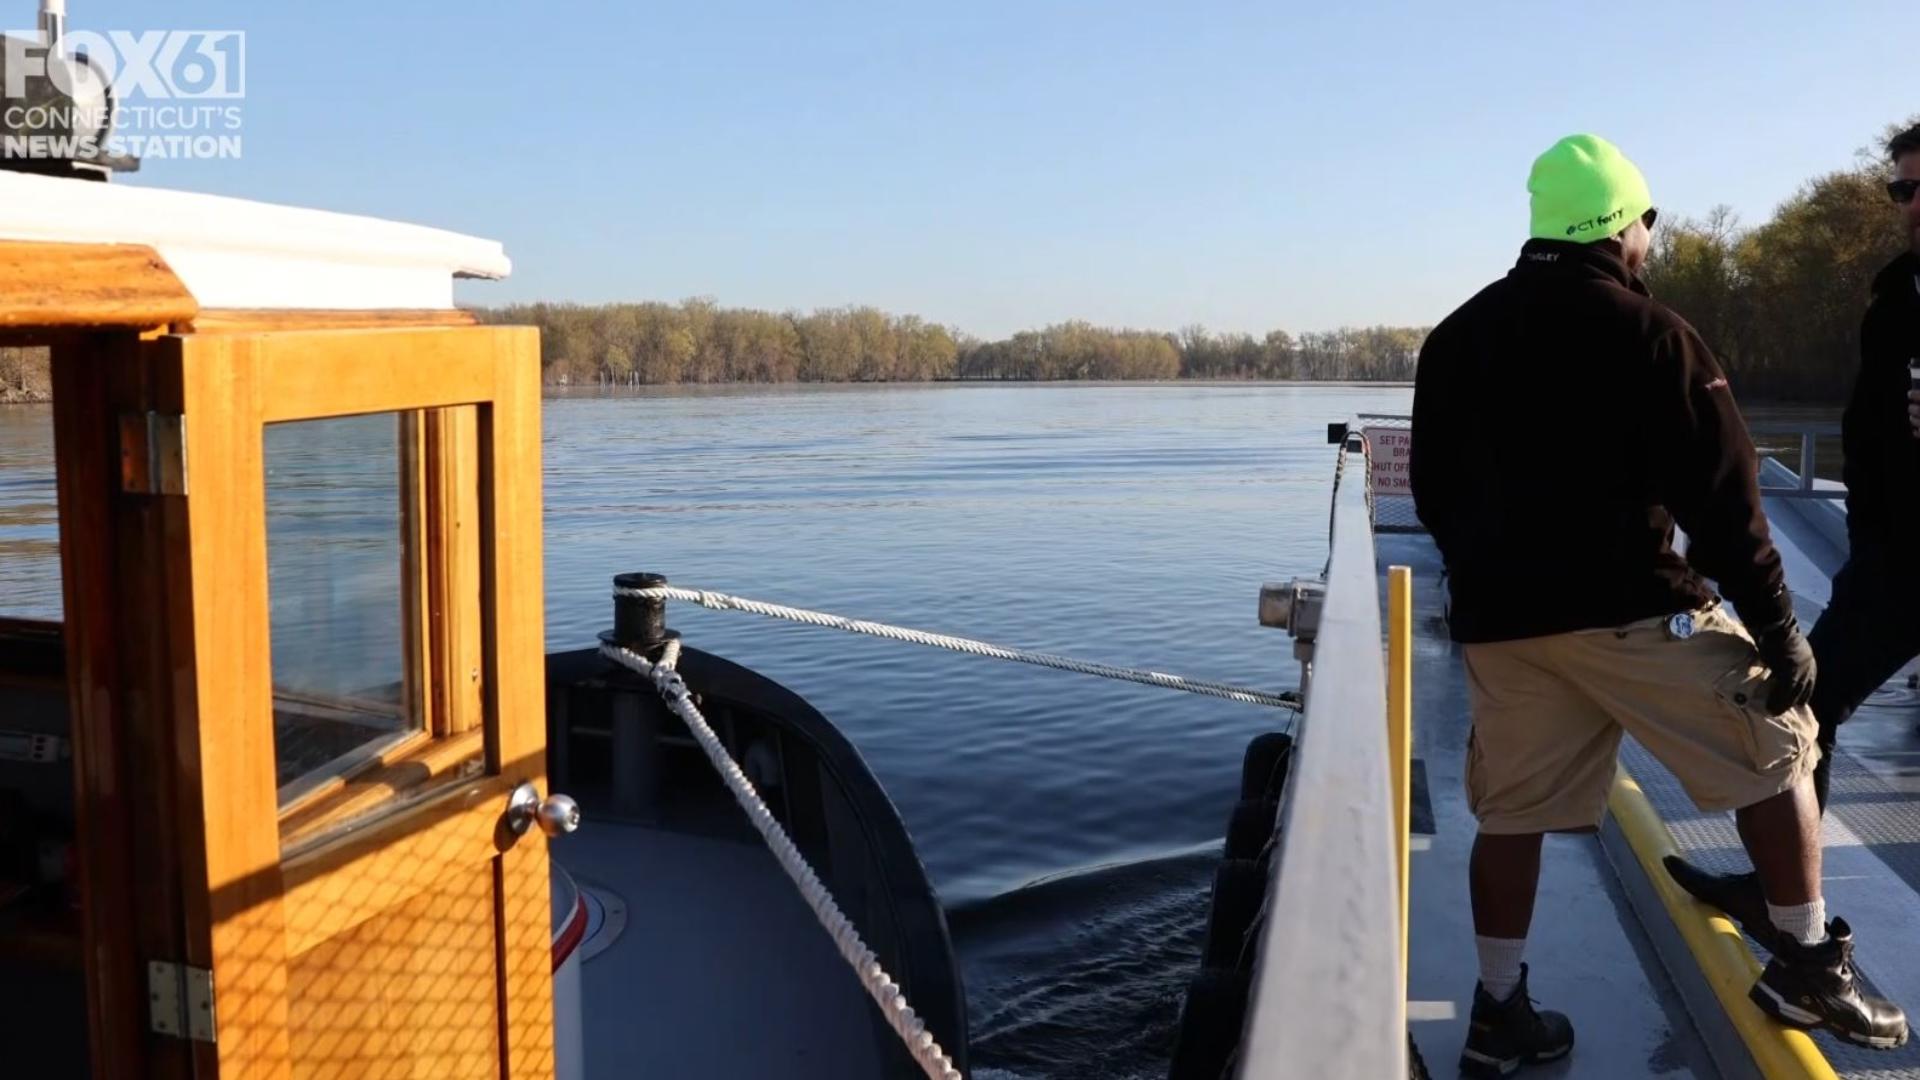 The Rocky Hill-Glastonbury ferry is open for the season.